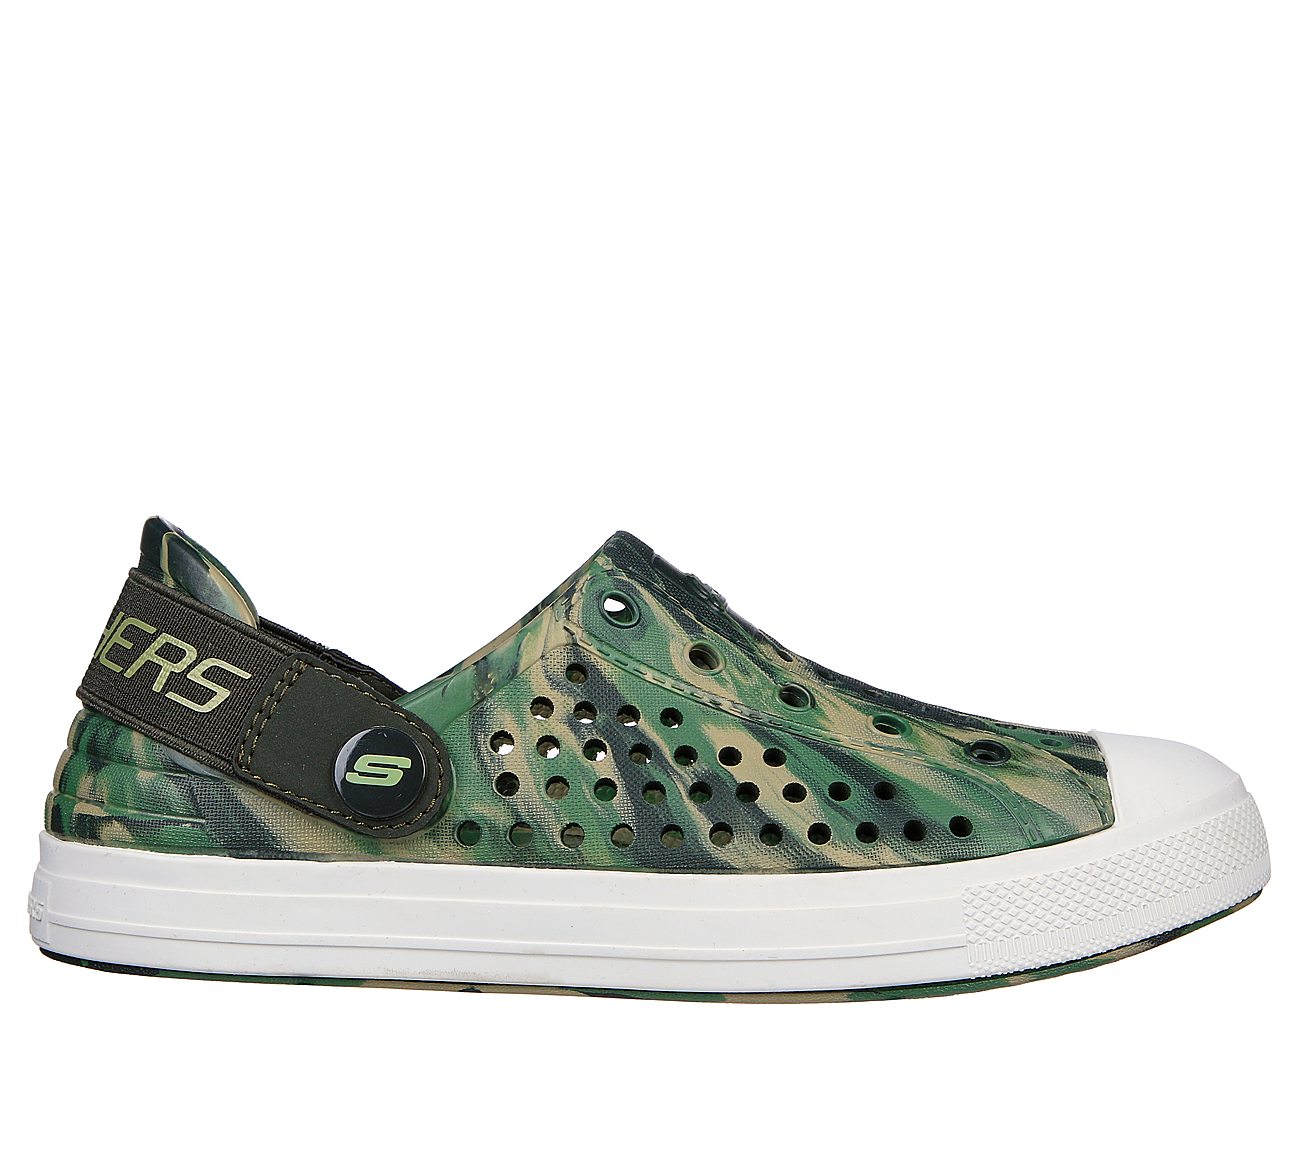 GUZMAN FIT - HYPNO-FUSE, CAMOUFLAGE Footwear Lateral View